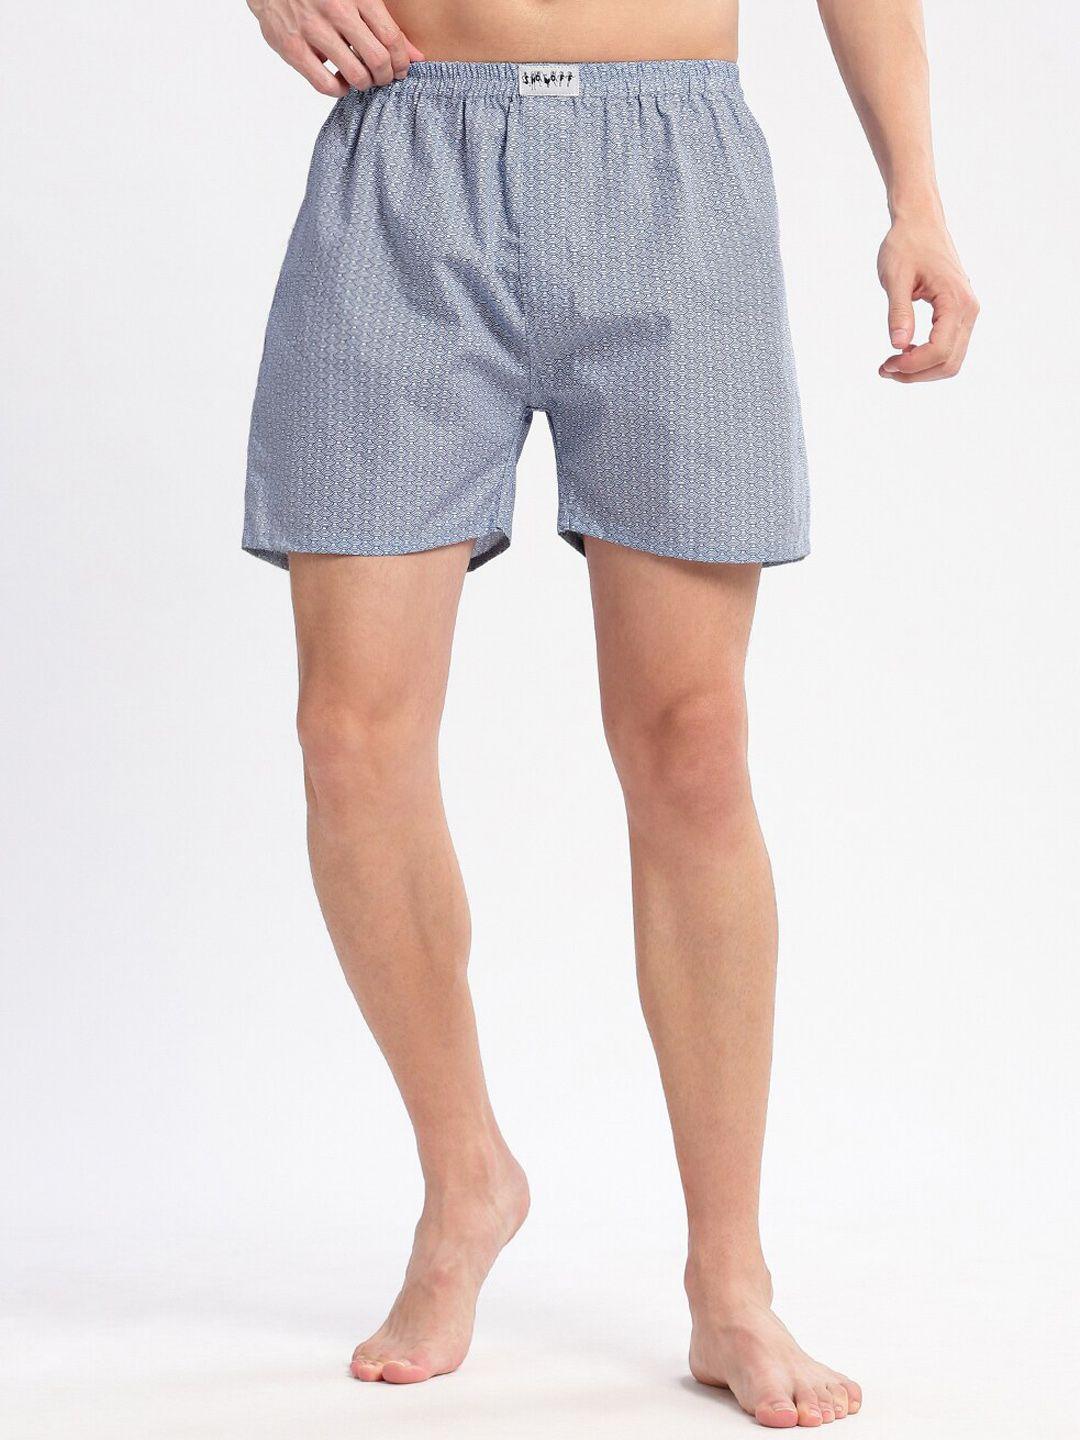 showoff geometric printed cotton boxers am-141